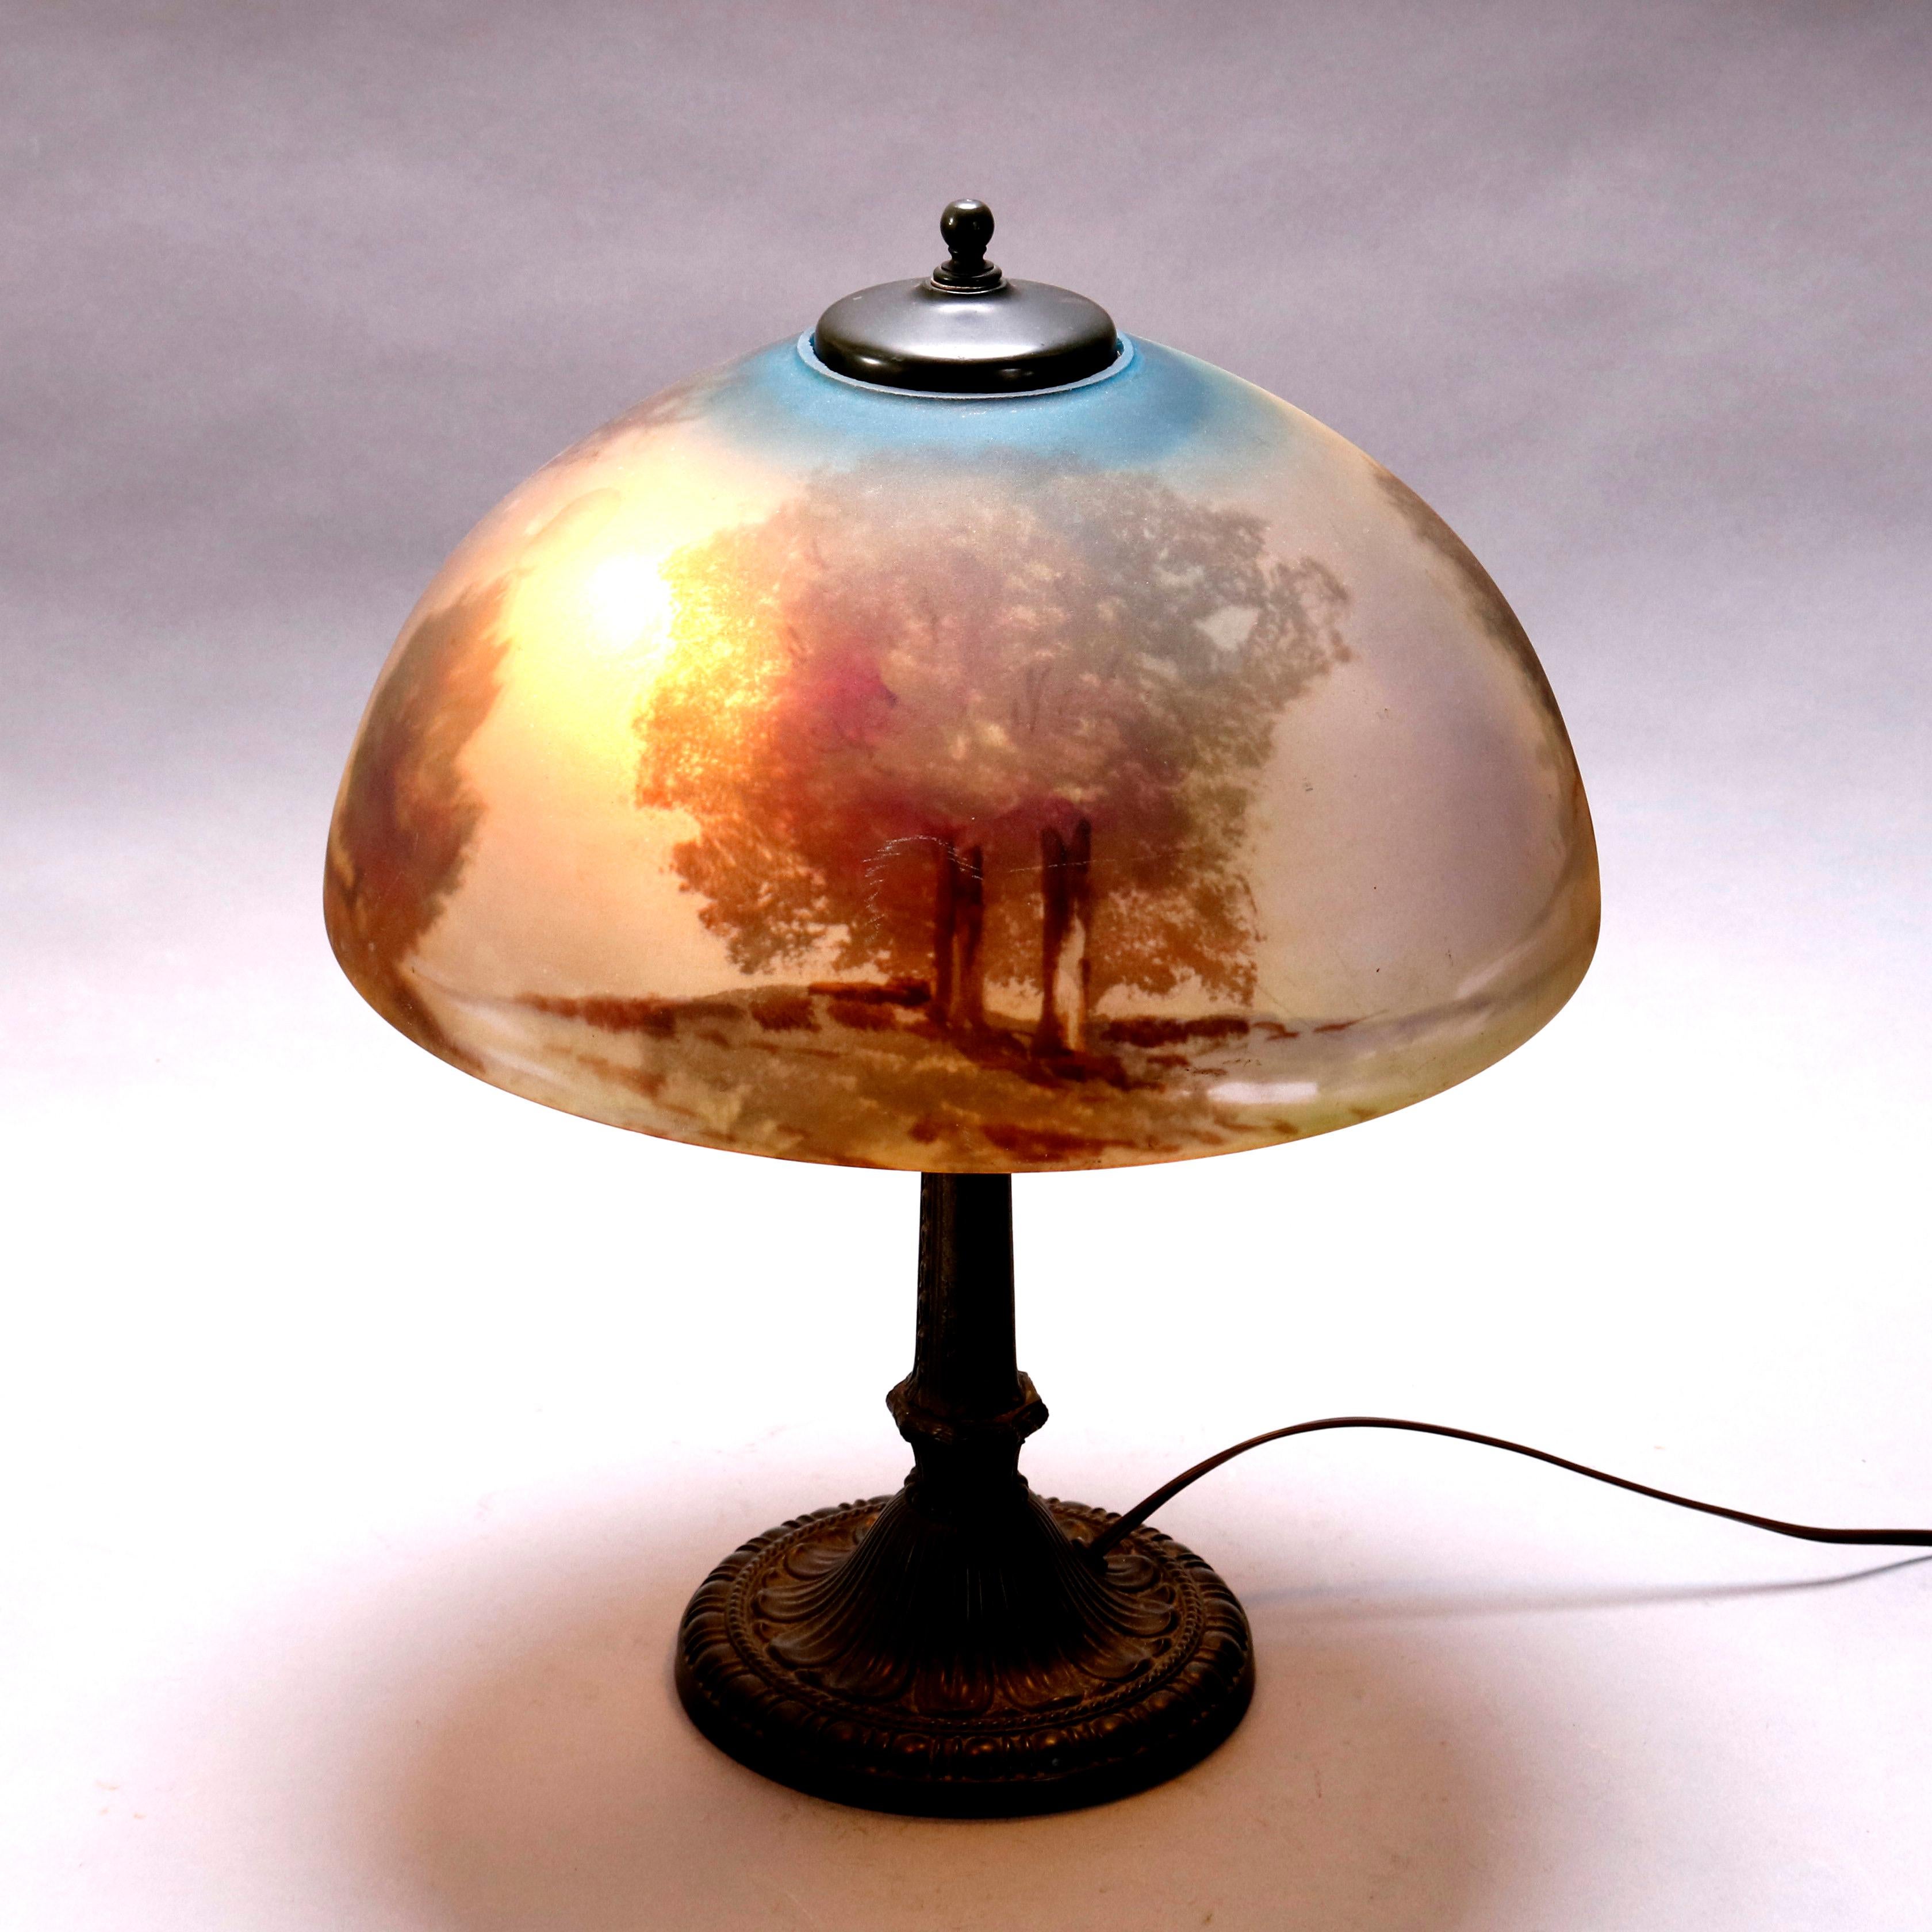 An antique Arts & Crafts Pittsburgh School table lamp by E. Miller & Co. offers cast bronze base having Dual independently controlled sockets, is embossed with maker, and surmounted by a reverse painted glass dome form shade with cottage in woodland